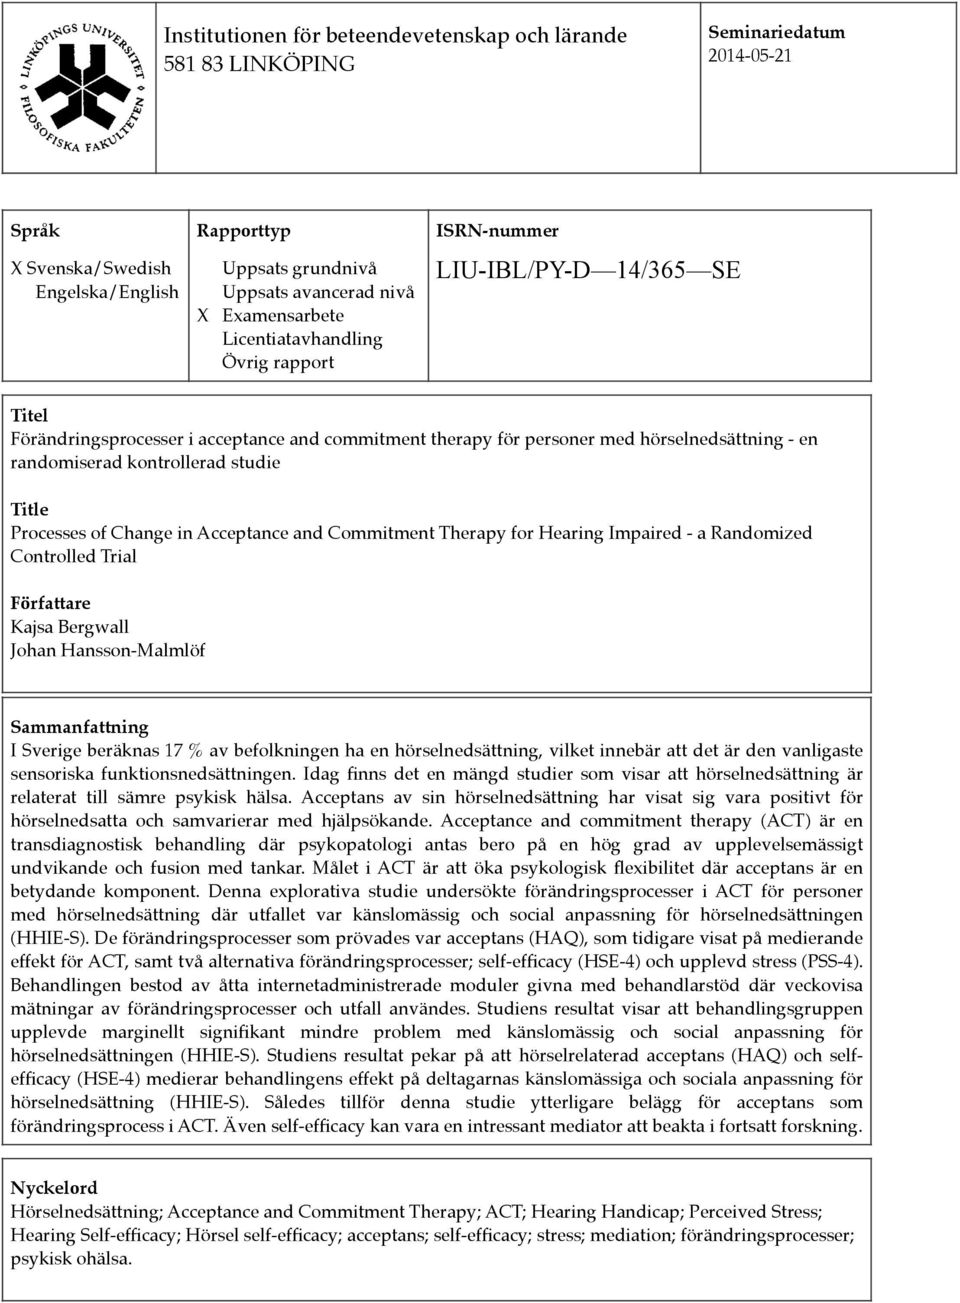 studie Title Processes of Change in Acceptance and Commitment Therapy for Hearing Impaired - a Randomized Controlled Trial Författare Kajsa Bergwall Johan Hansson-Malmlöf Sammanfattning I Sverige